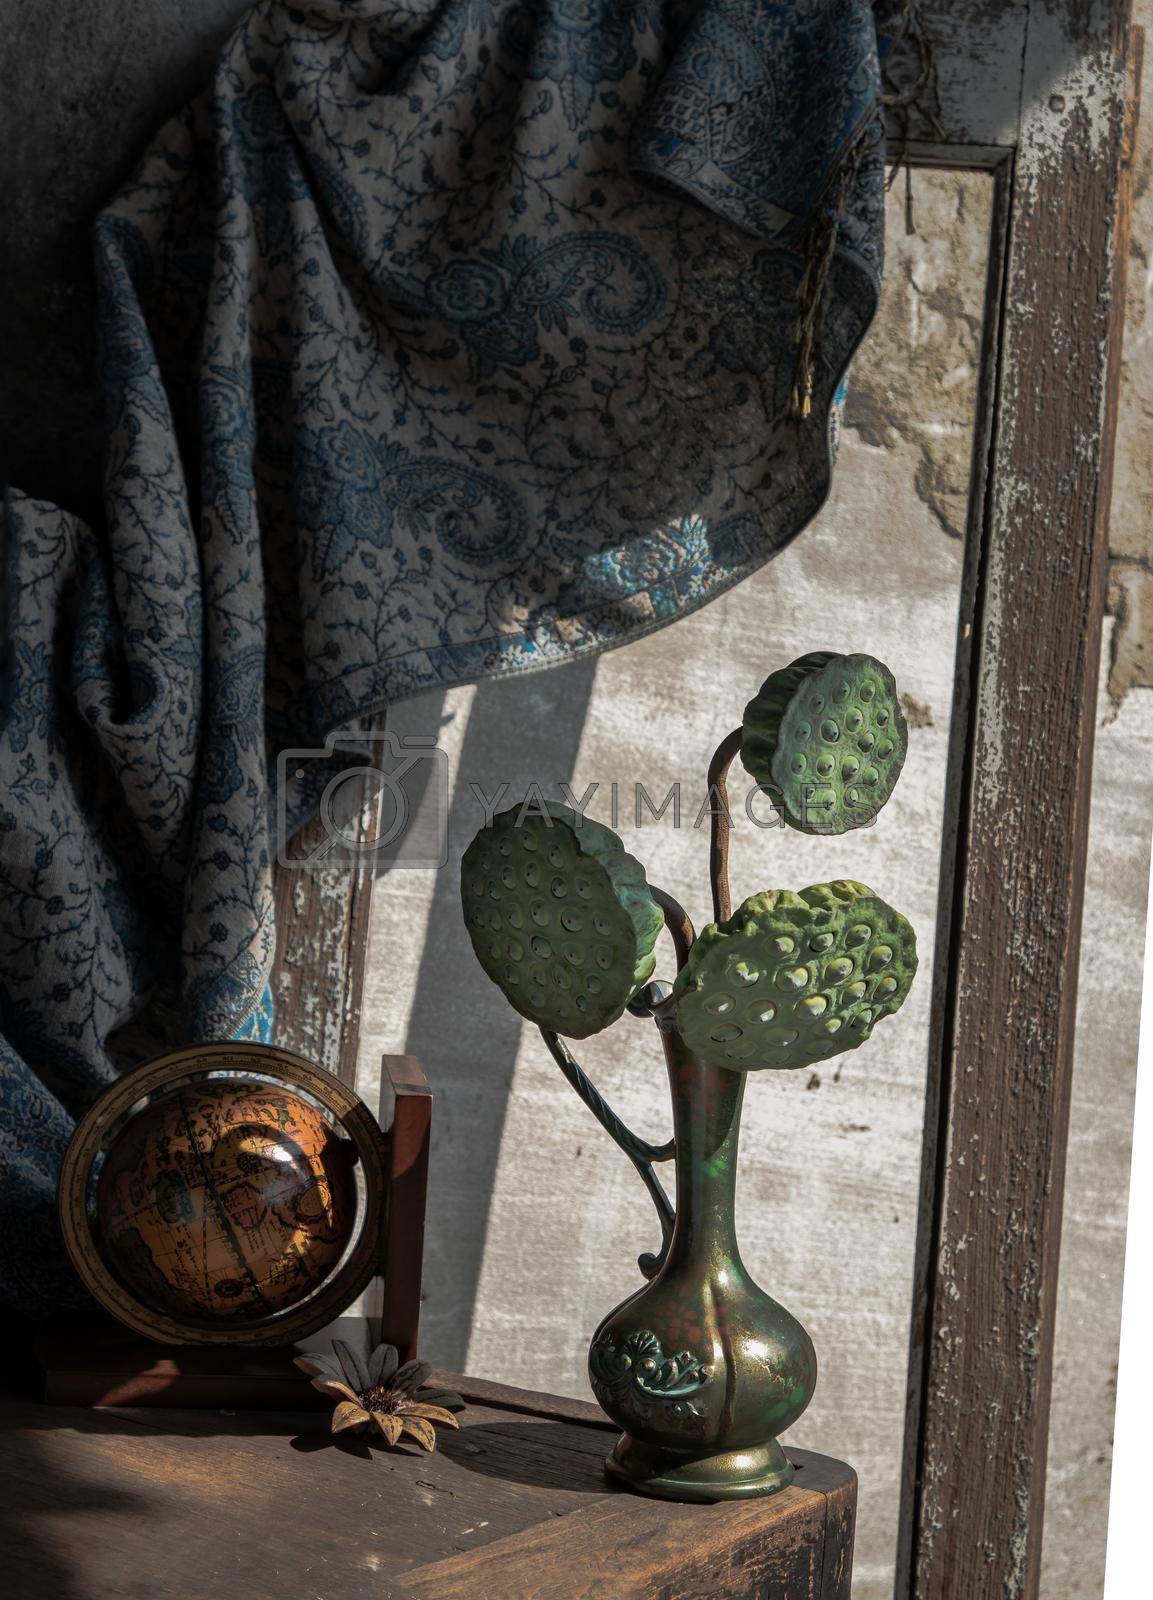 Fresh green lotus seed pods in Antique carved iron jug or vase with Wood globe on Old wooden chair. Dark tone, Selective focus.